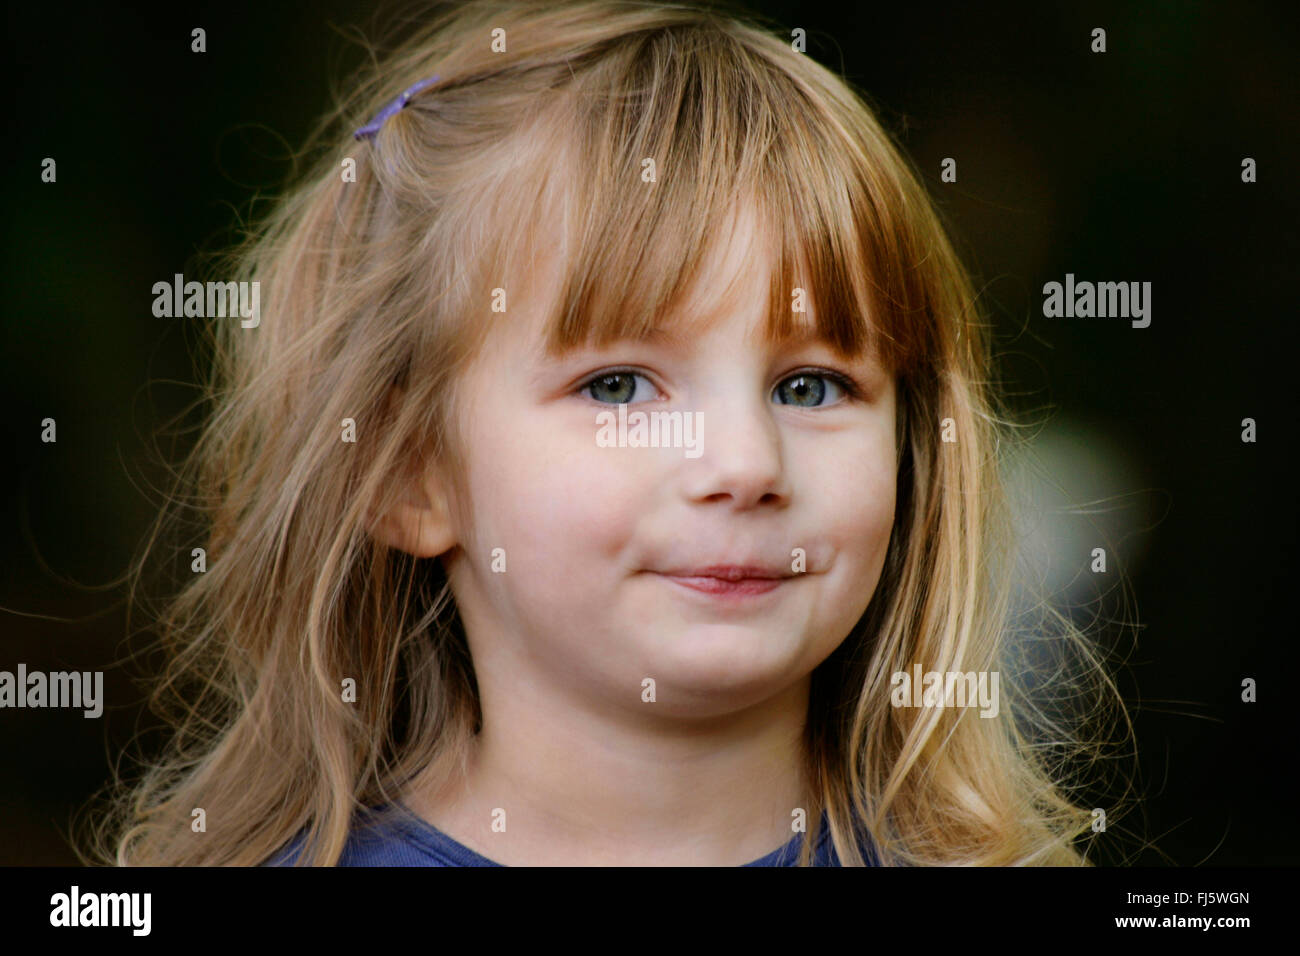 cute little girl, portrait of a child, Germany Stock Photo